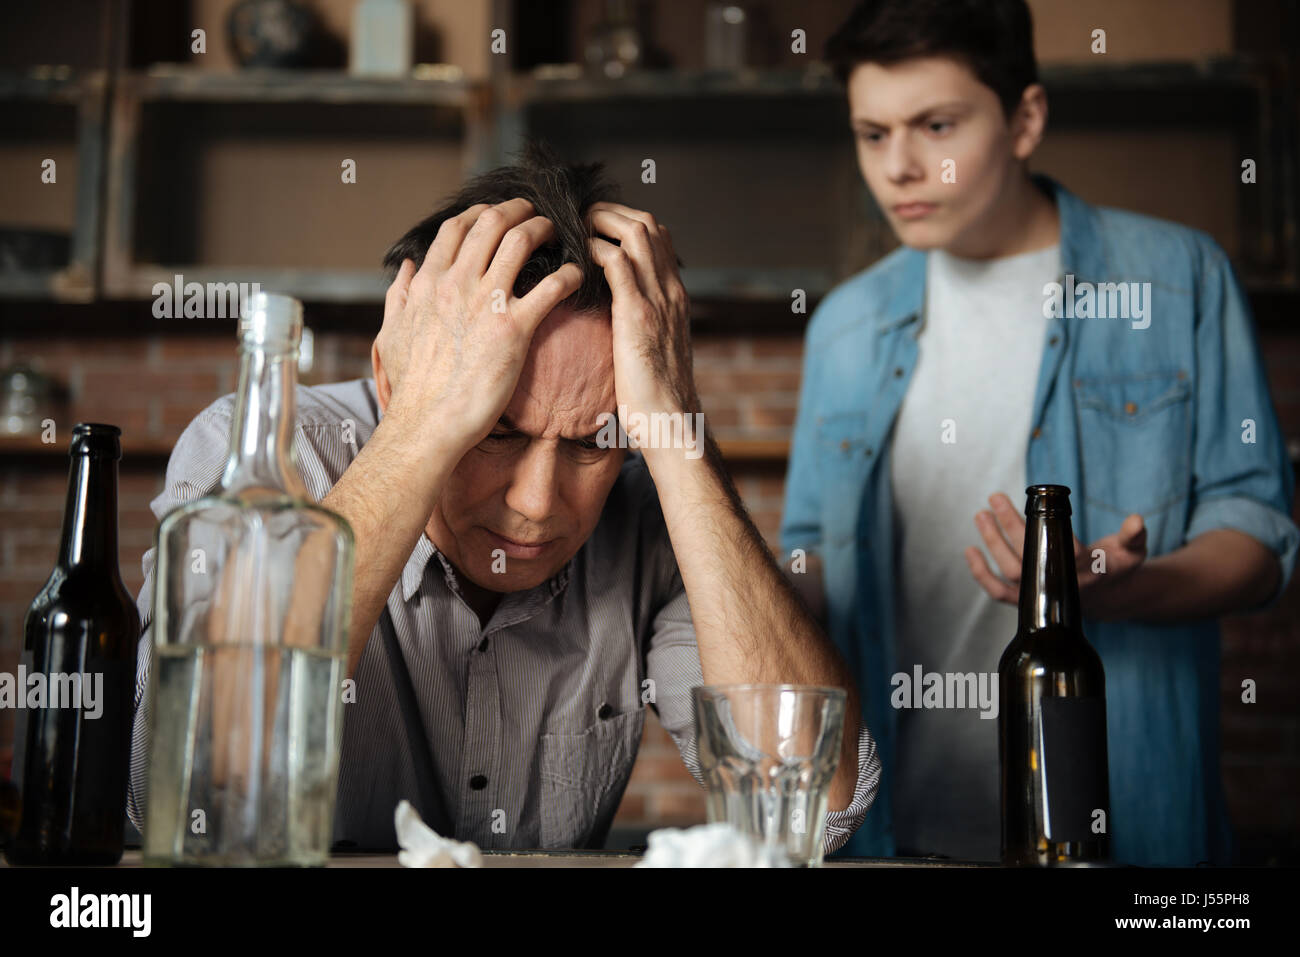 Portrait of upset man putting both hands on forehead Stock Photo - Alamy